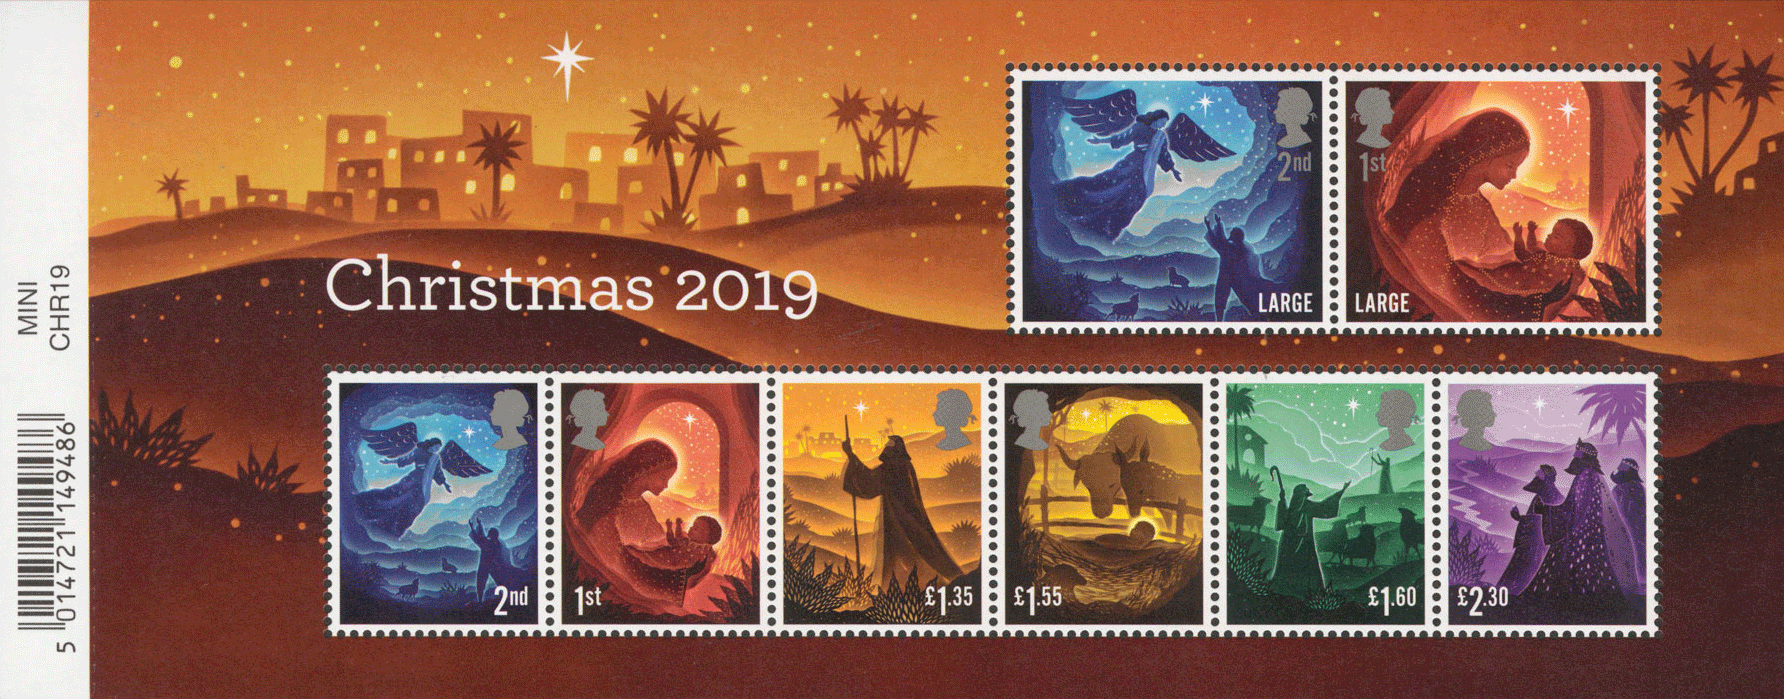 A small sheet of stamps containing 8 stamps featuring images of the nativity story. 